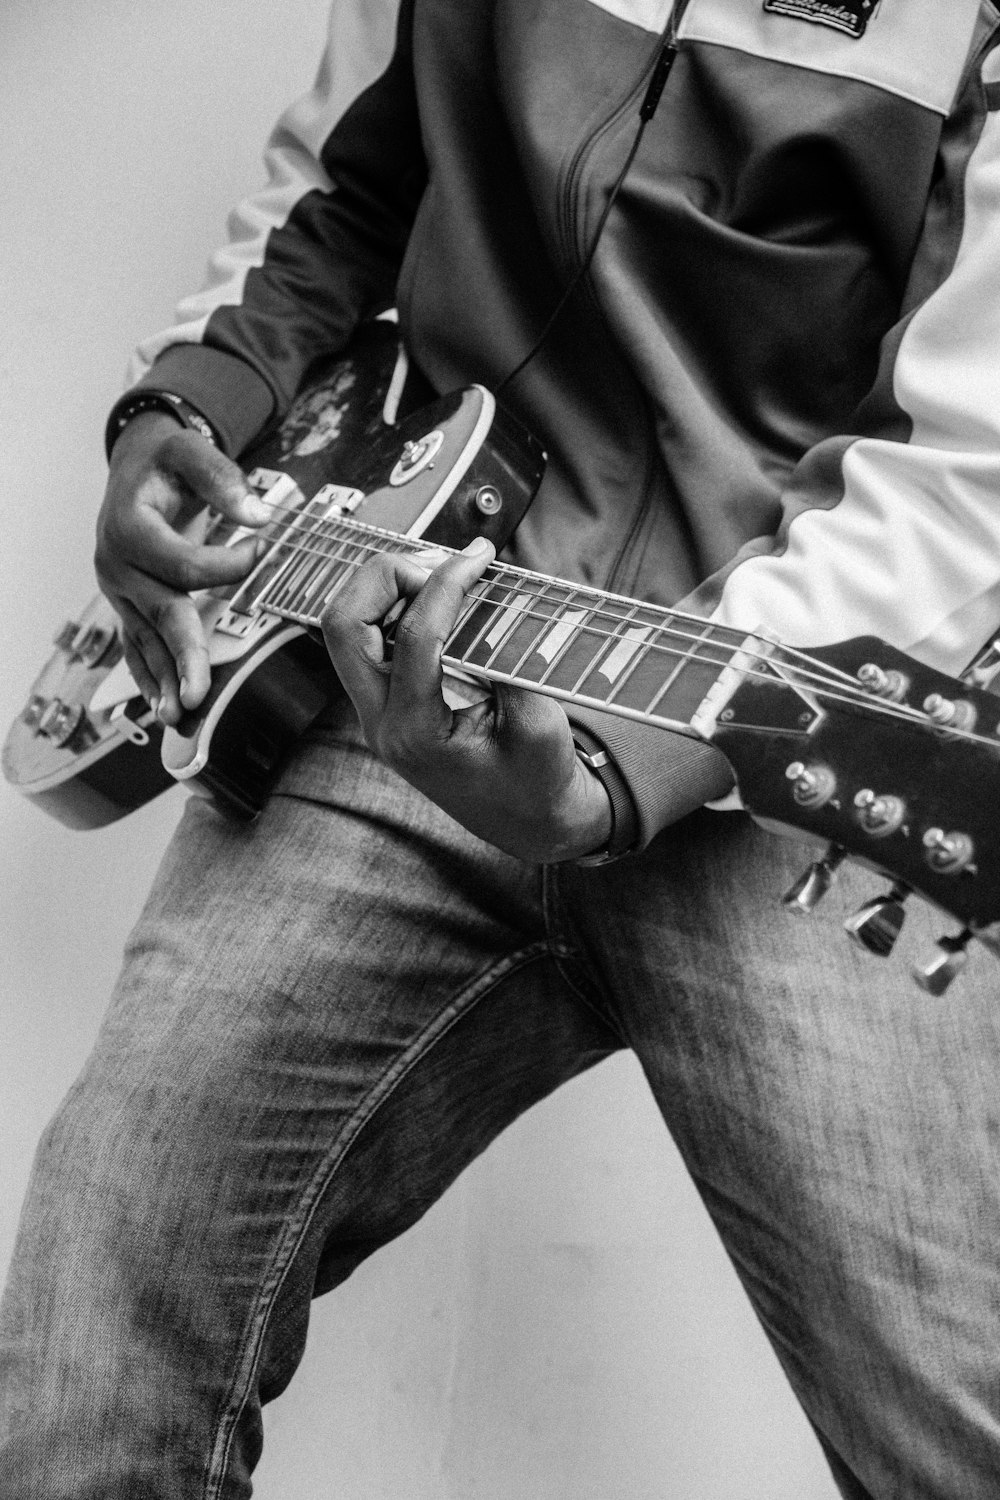 grayscale photo of person playing guitar